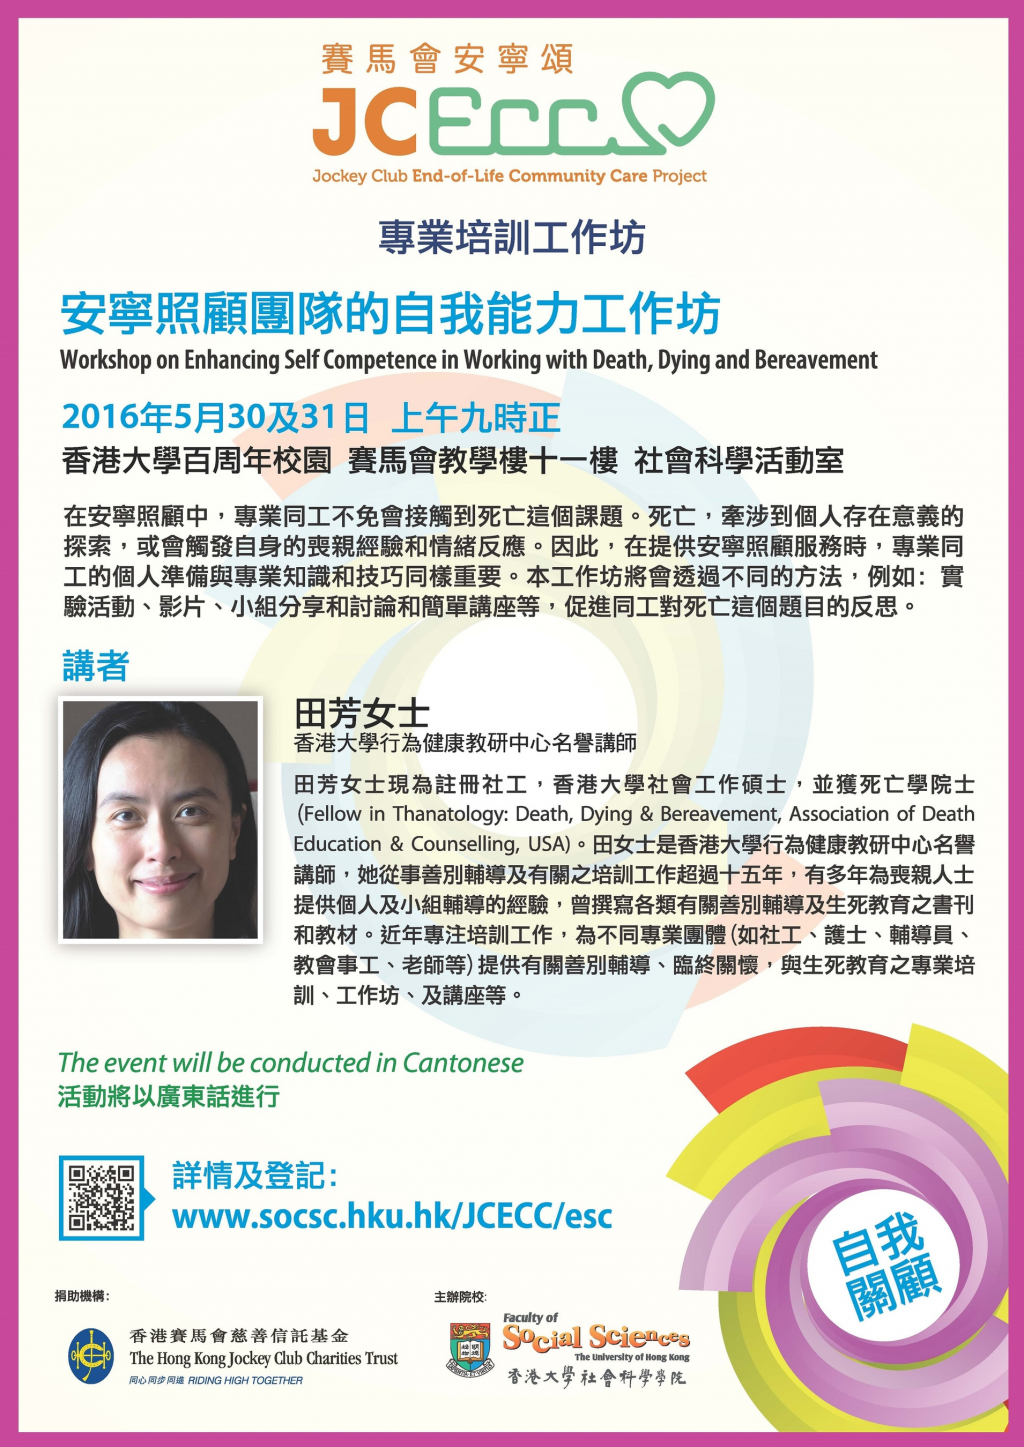 Workshop on Enhancing Self Competence in Working with Death, Dying and Bereavement 安寧照顧團隊的自我能力工作坊